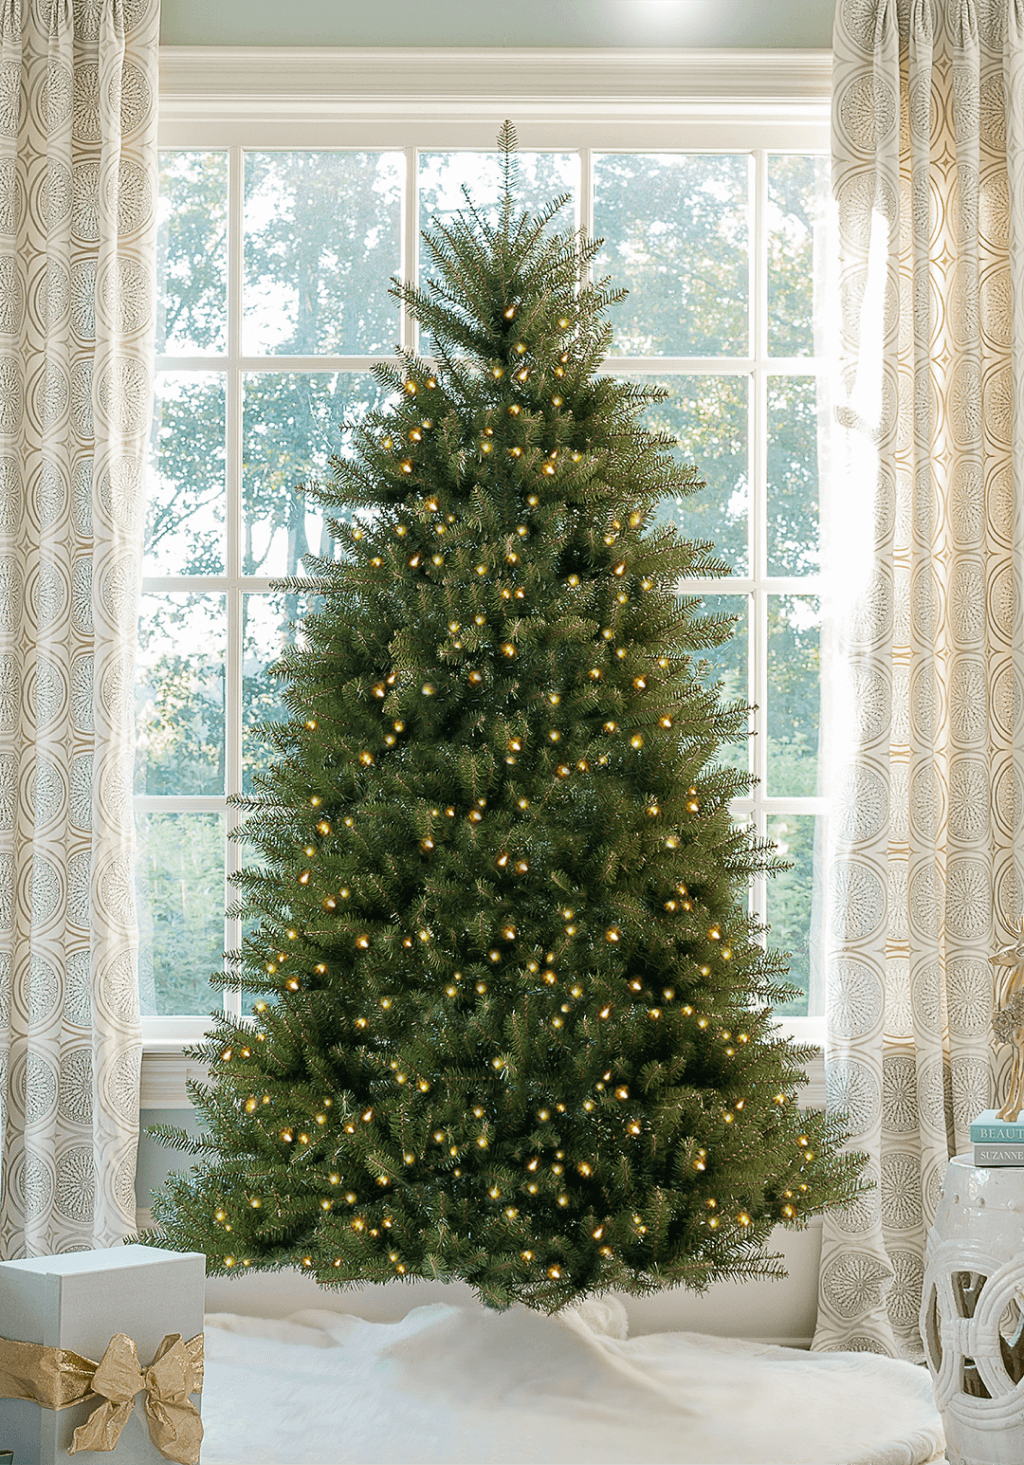 King of Christmas 7.5' Yorkshire Fir Artificial Christmas Tree with 600 Warm White LED Lights